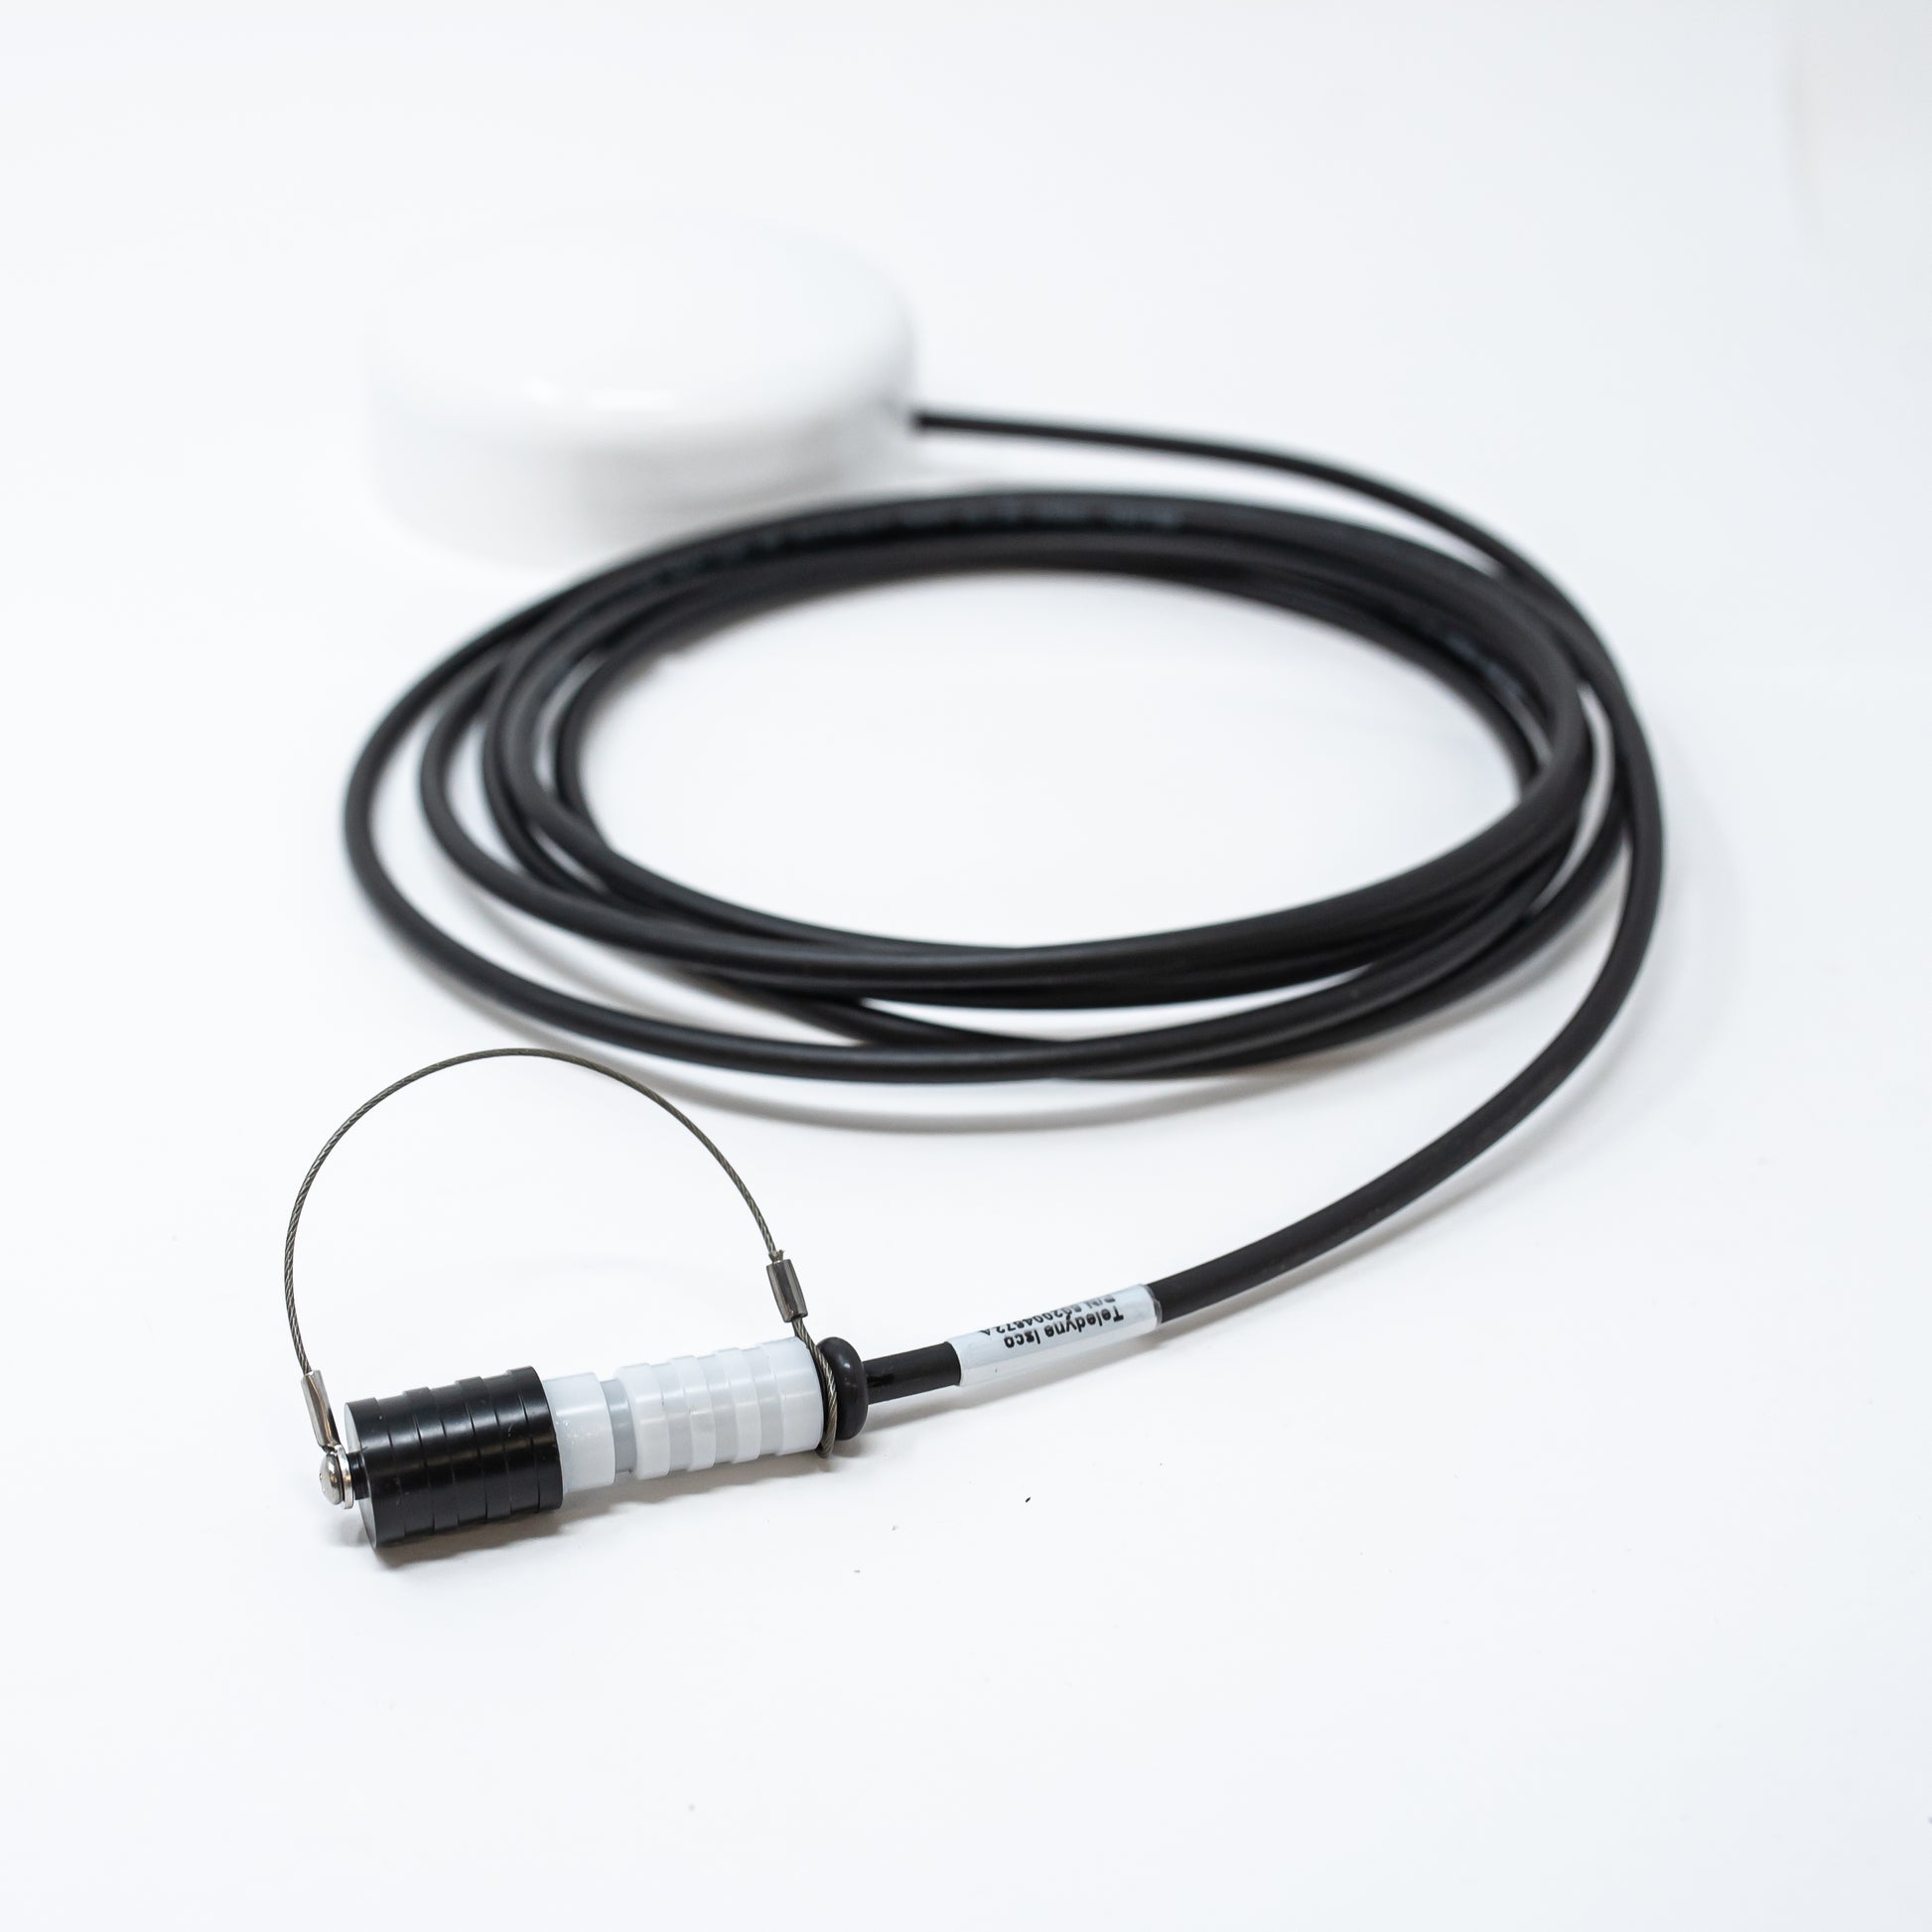 Round antenna with cable and connector